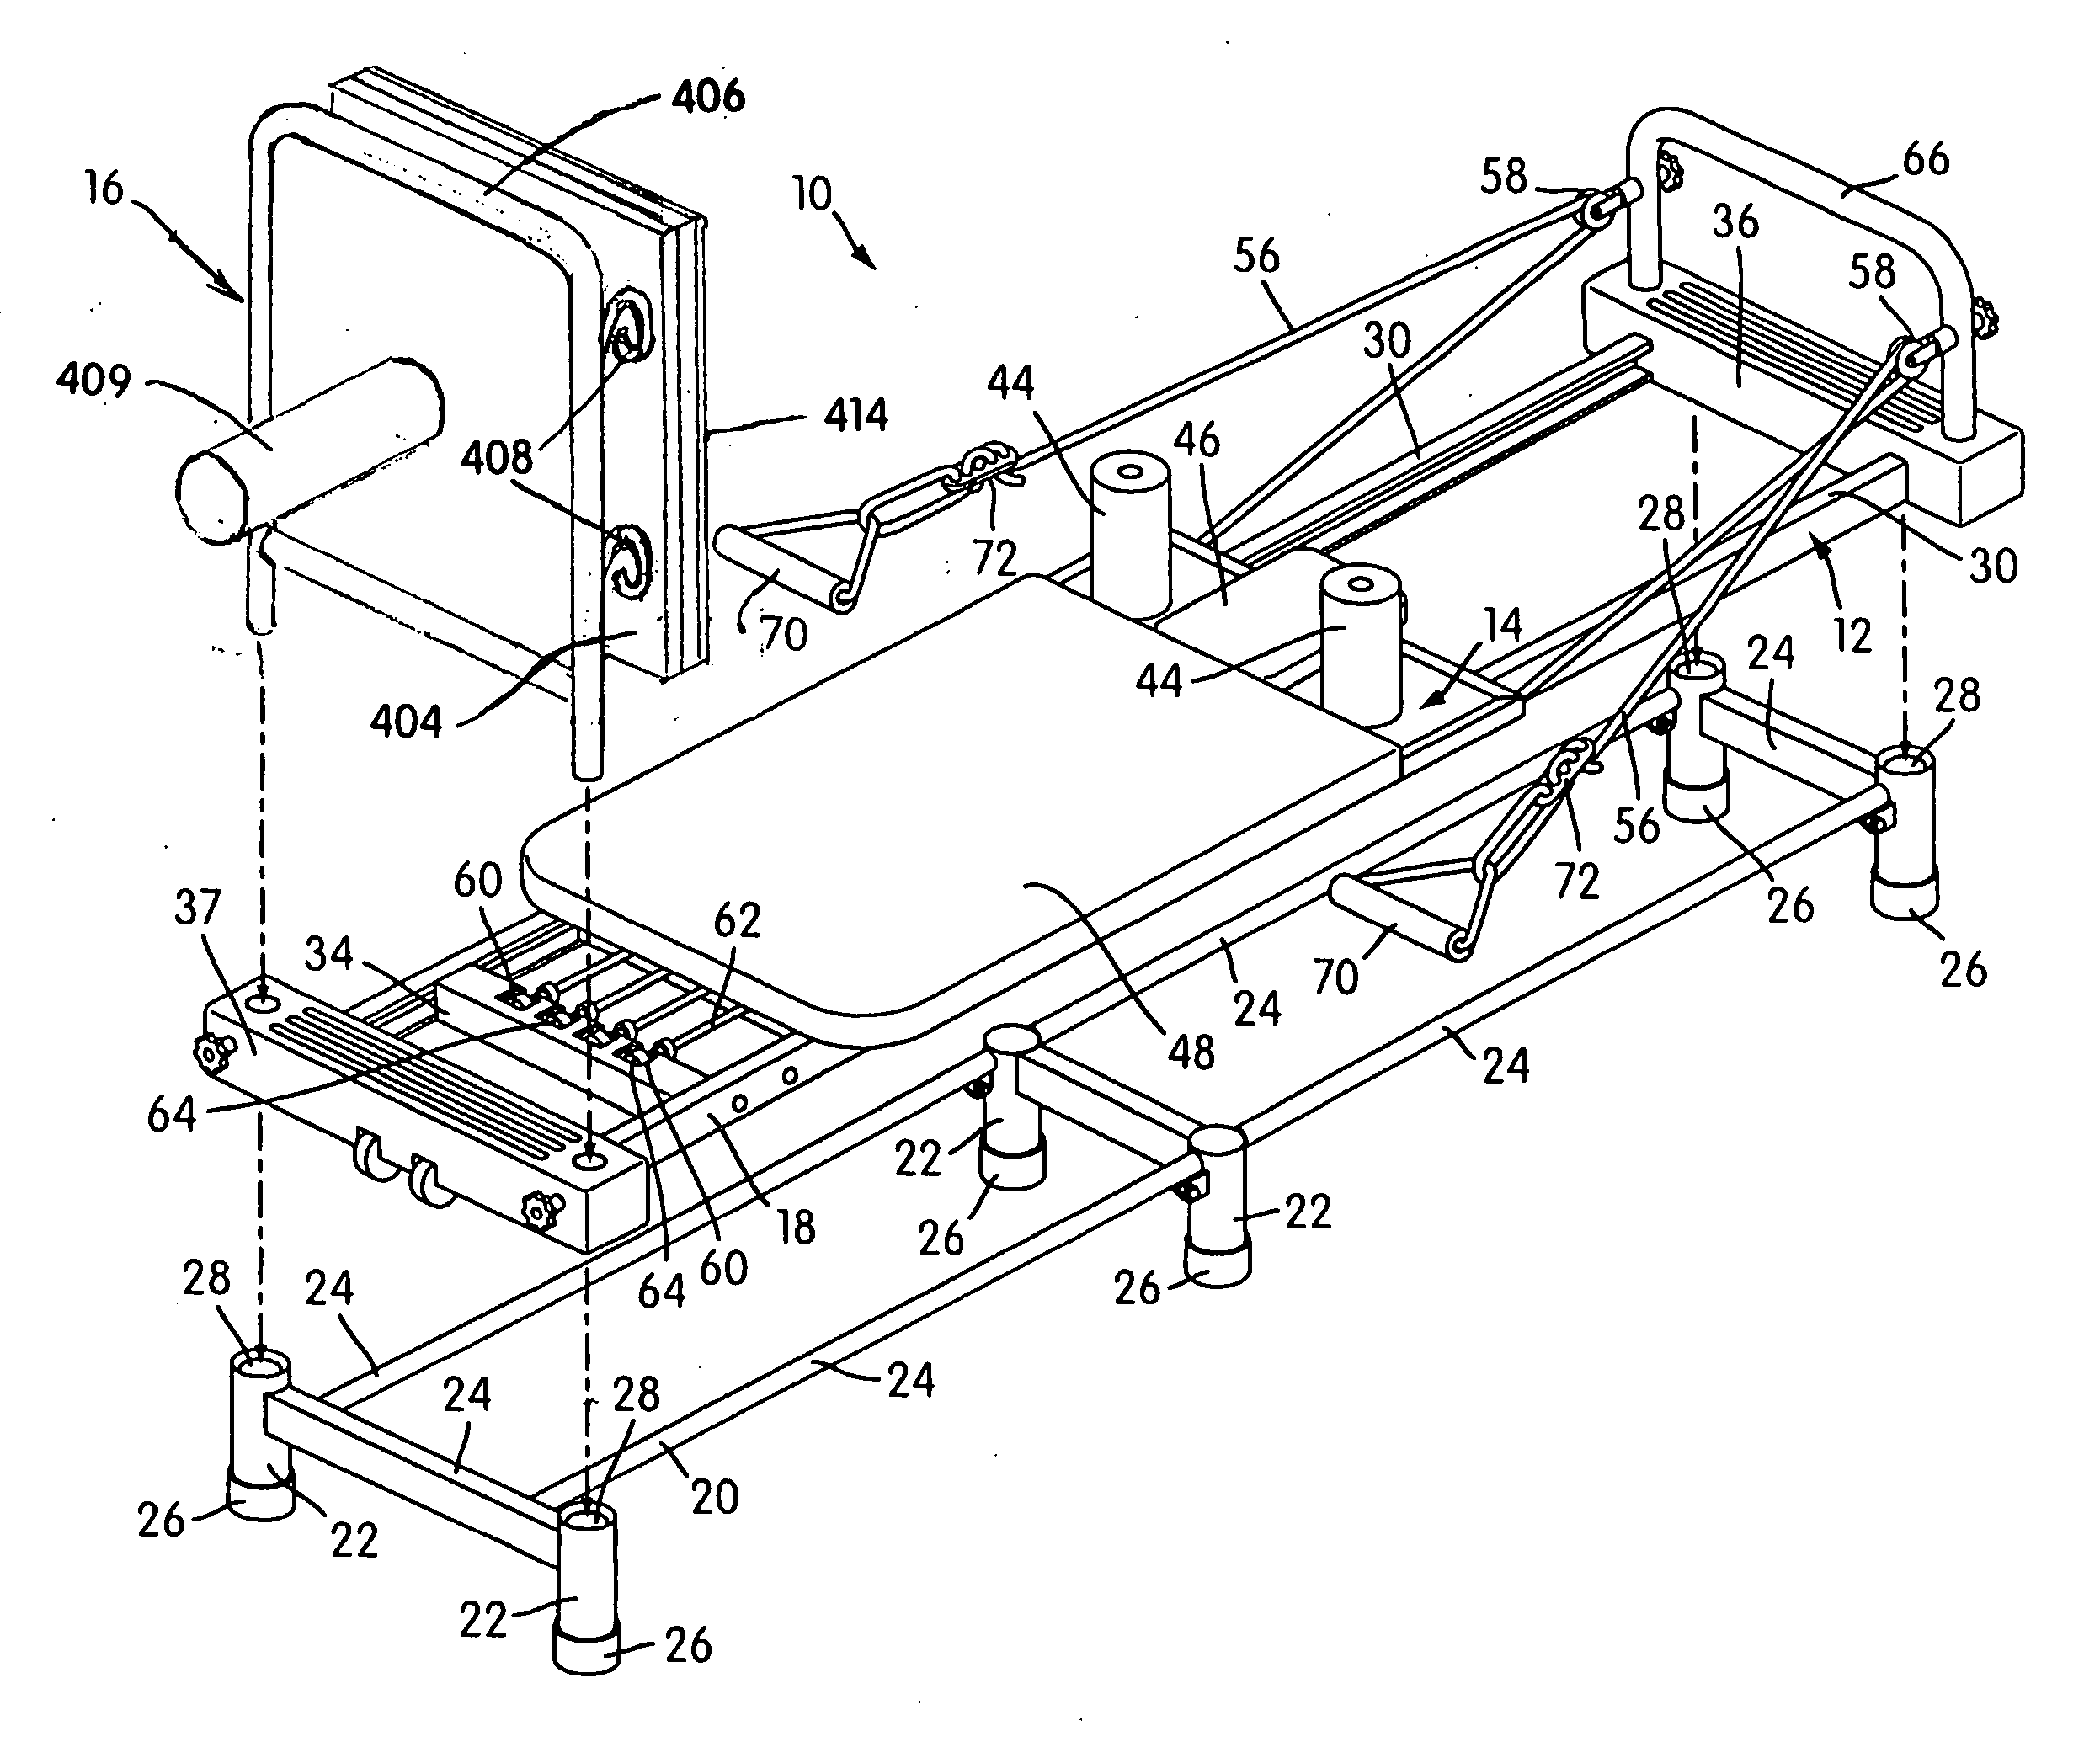 Exercise apparatus and method